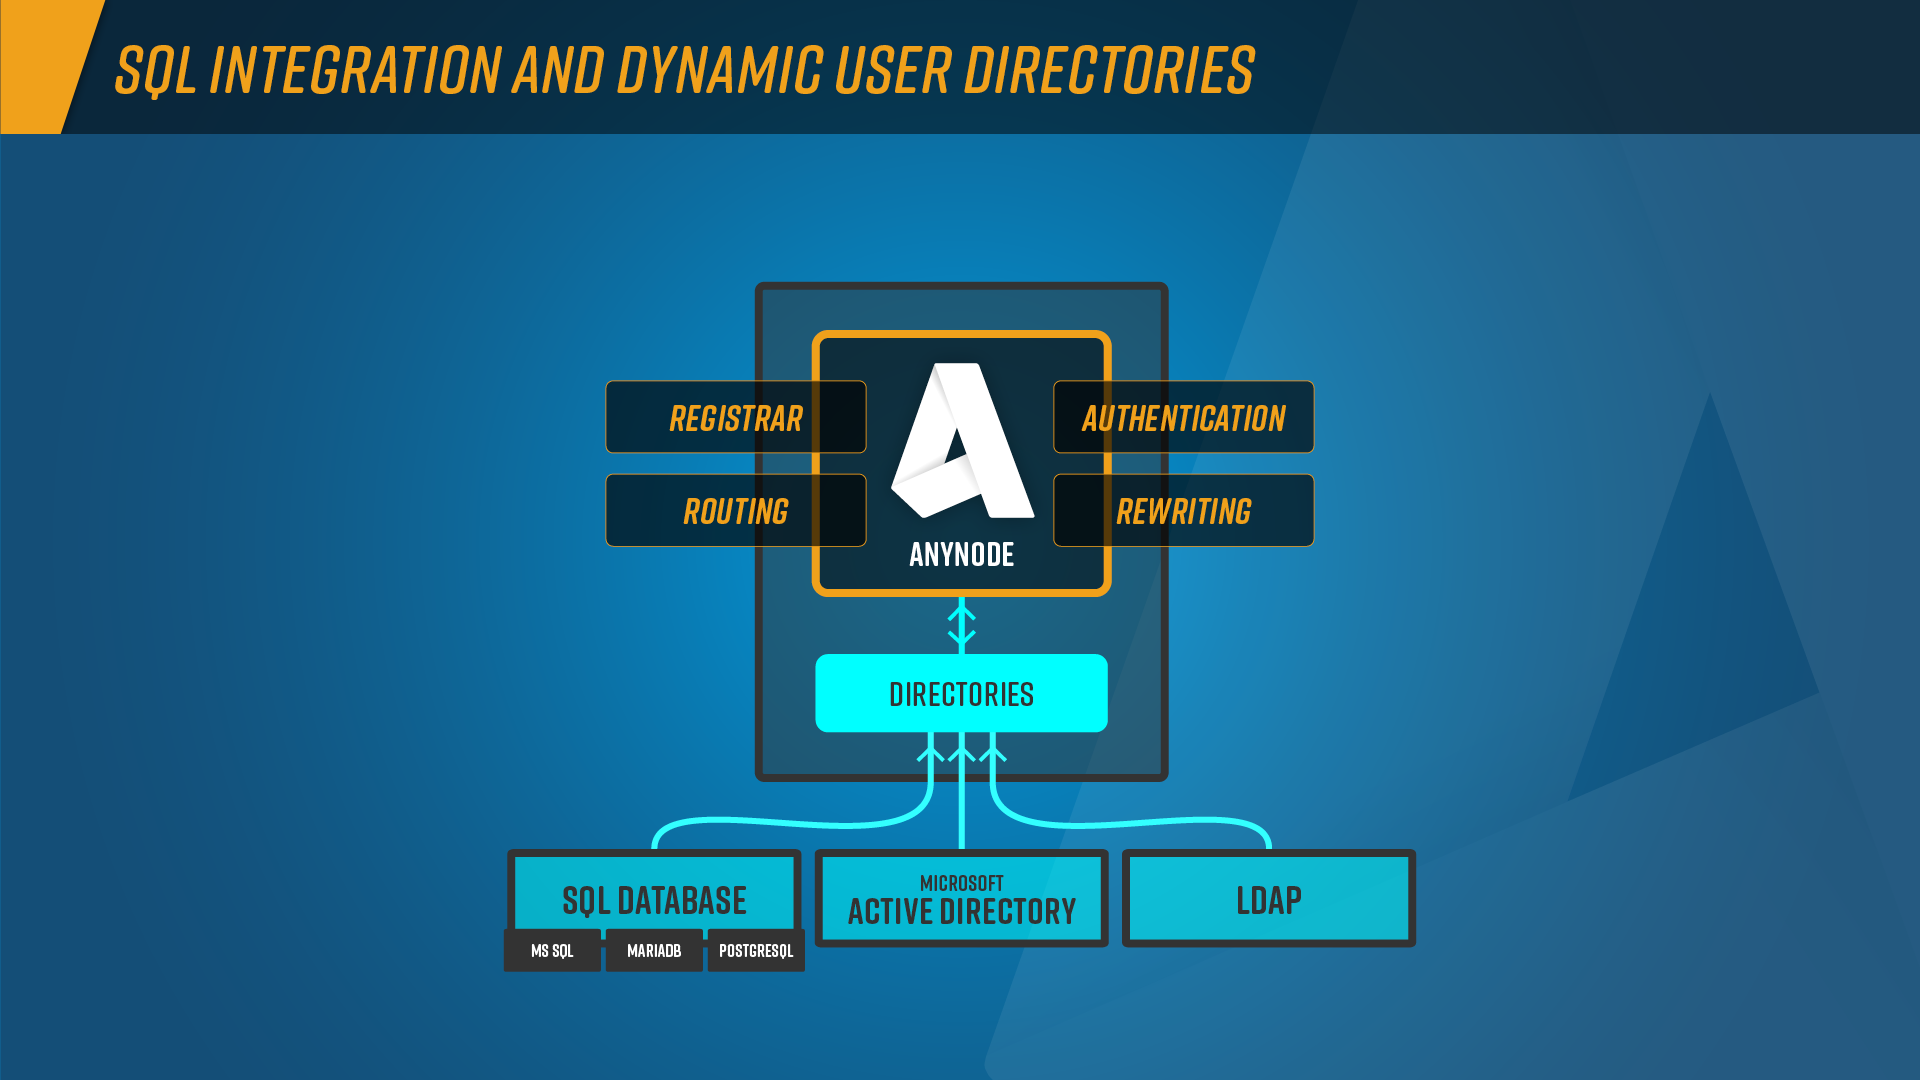 anynode infographic: Obtaining routing information, rewriting phone numbers, authentication, and a registrar from an SQL database or other dynamic data sources such as Microsoft Active Directory or LDAP.